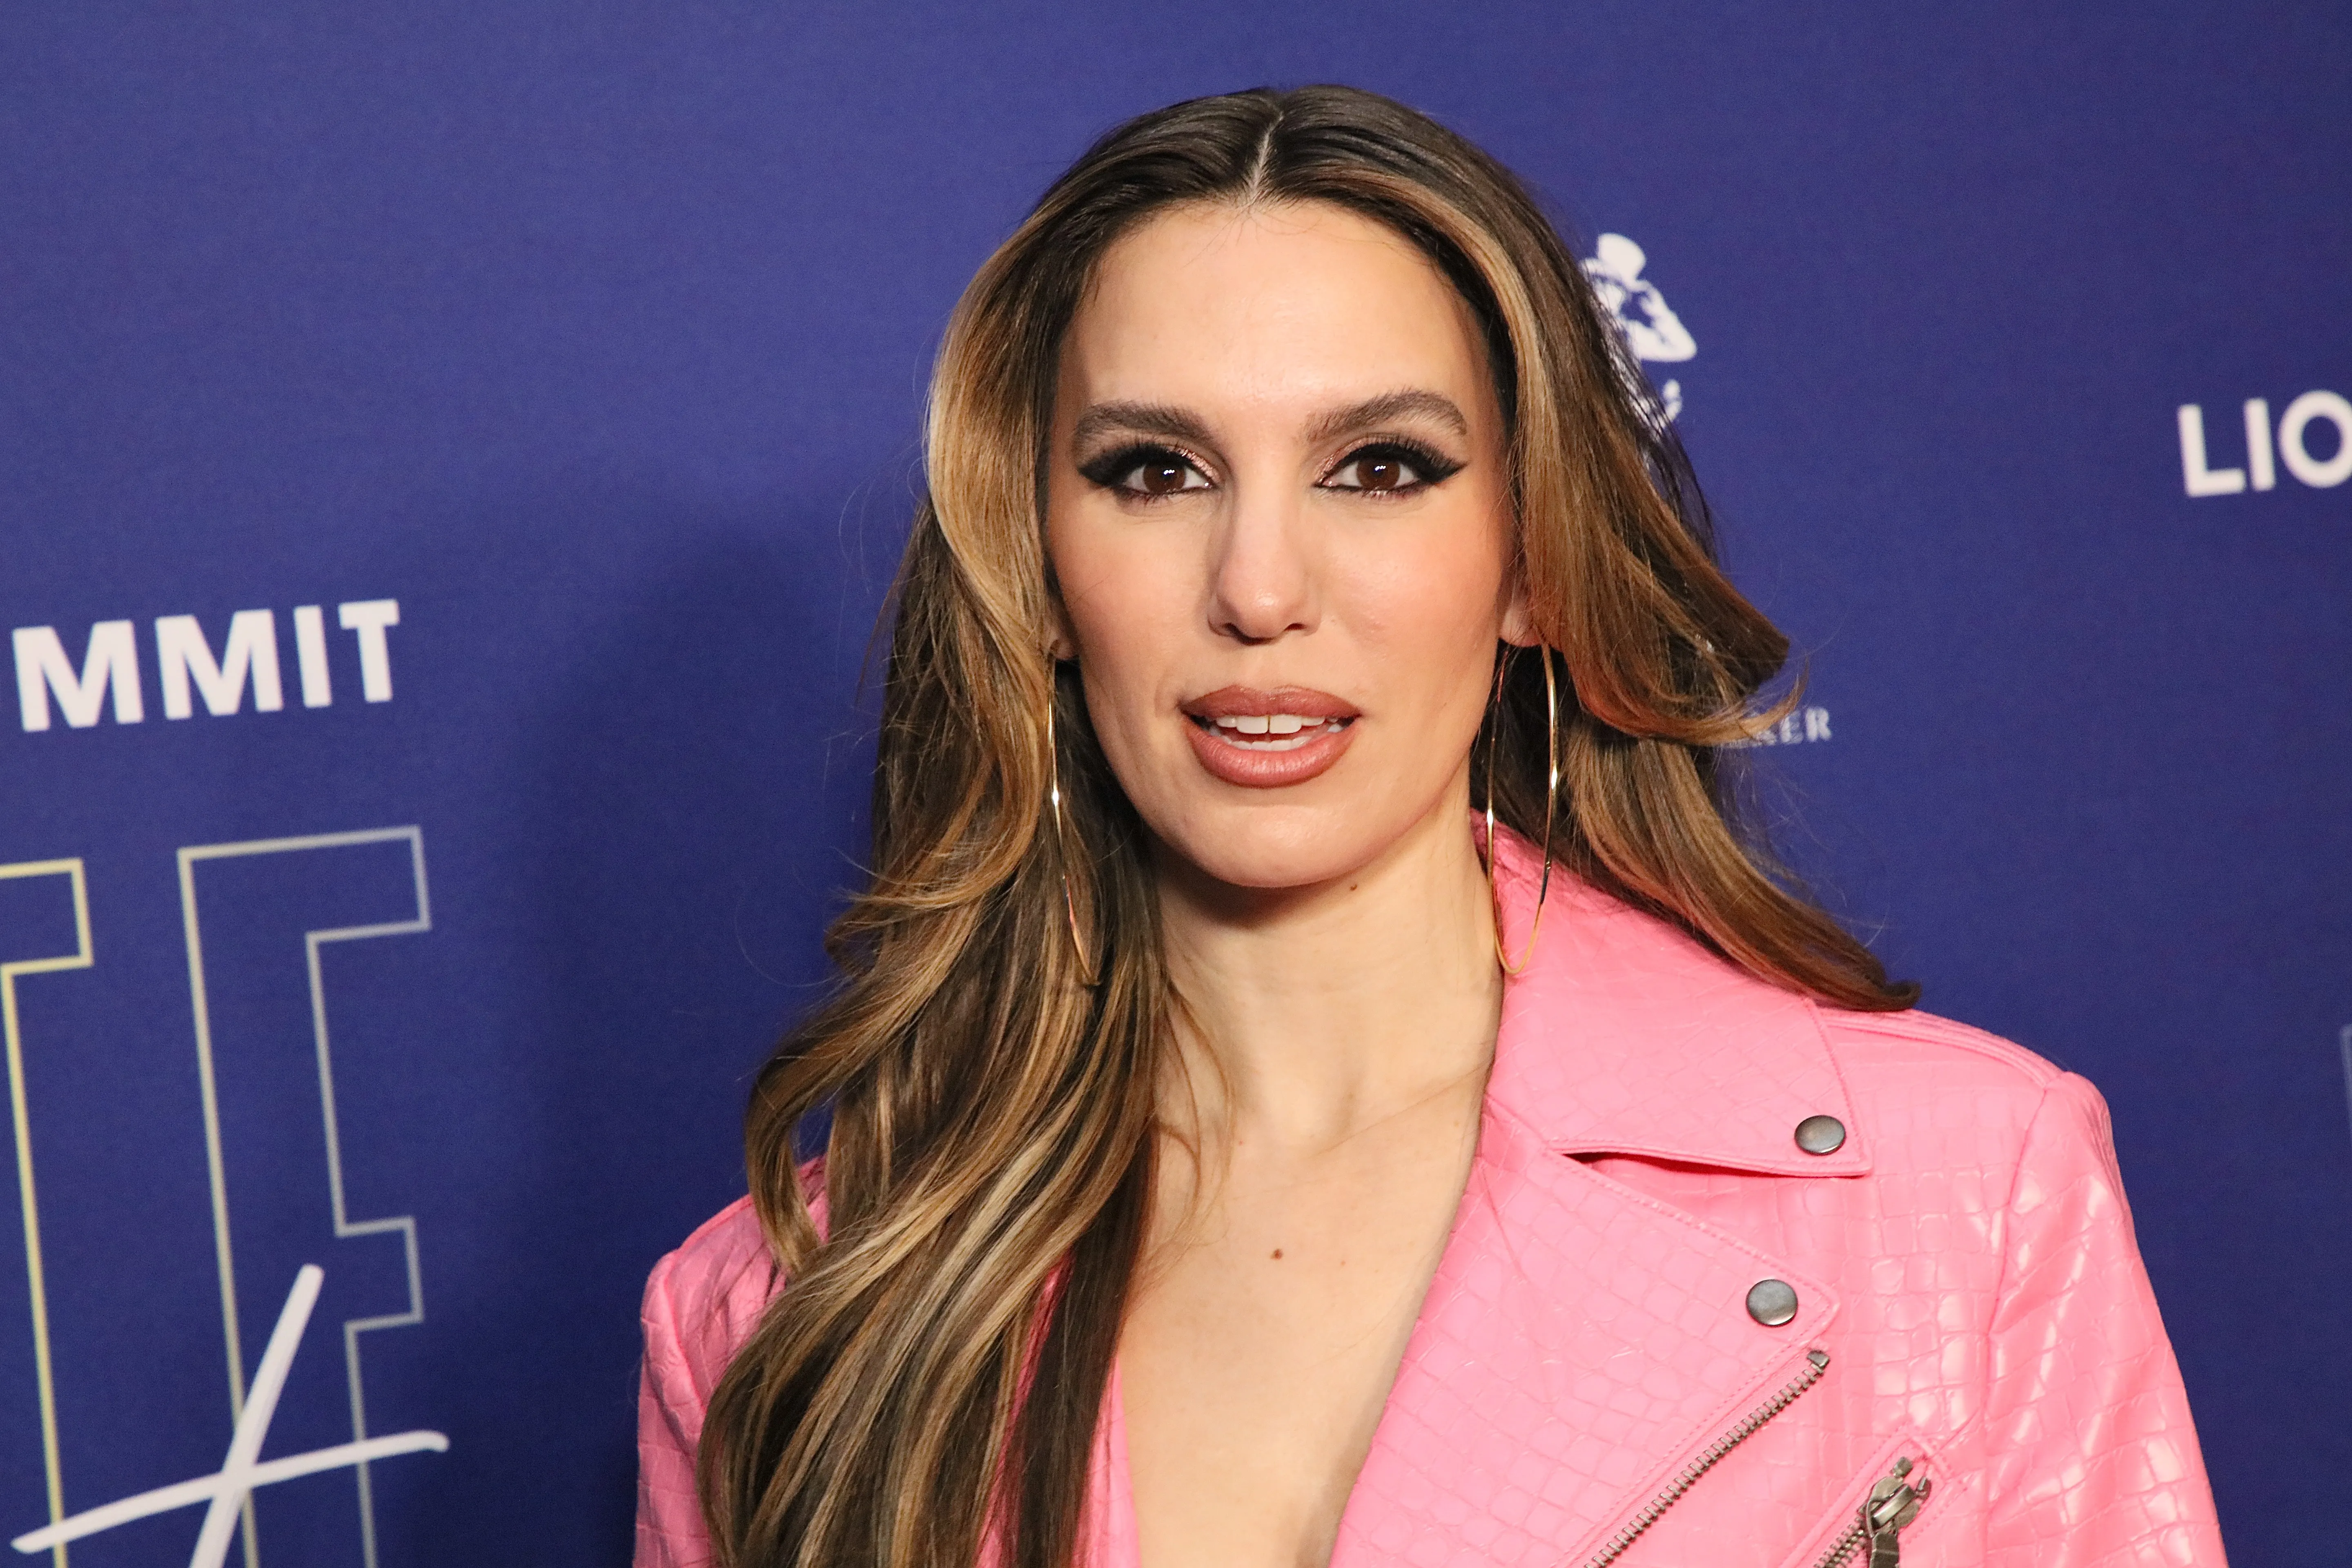 Disney star Christy Carlson Romano says celebrity is ‘extremely dehumanizing,’ demands change for child actors